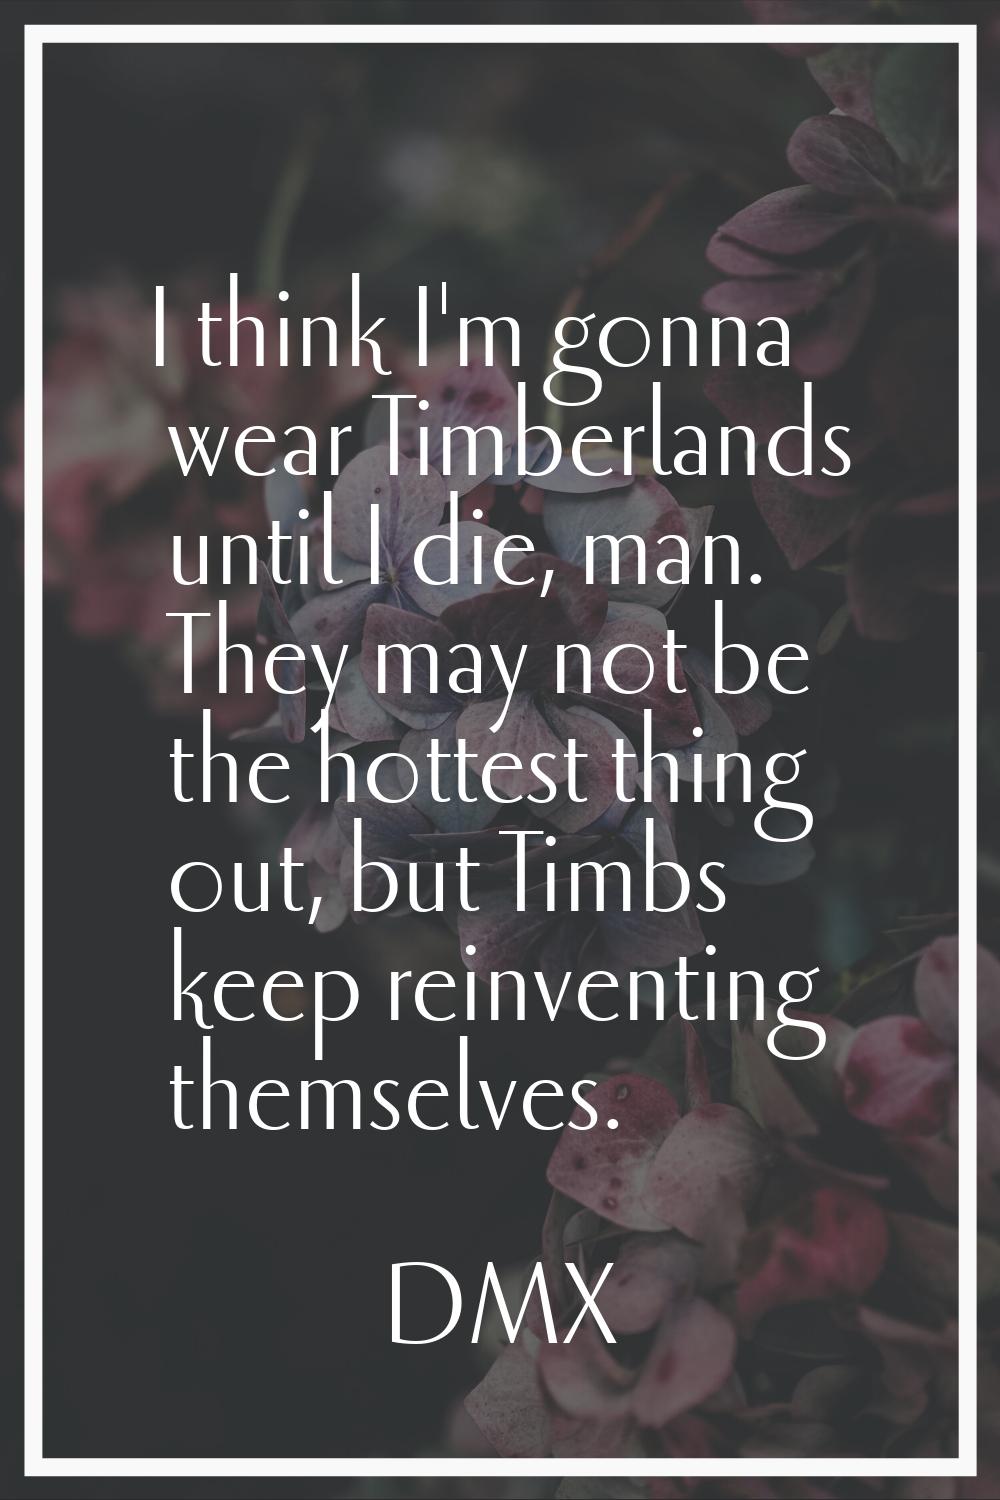 I think I'm gonna wear Timberlands until I die, man. They may not be the hottest thing out, but Tim